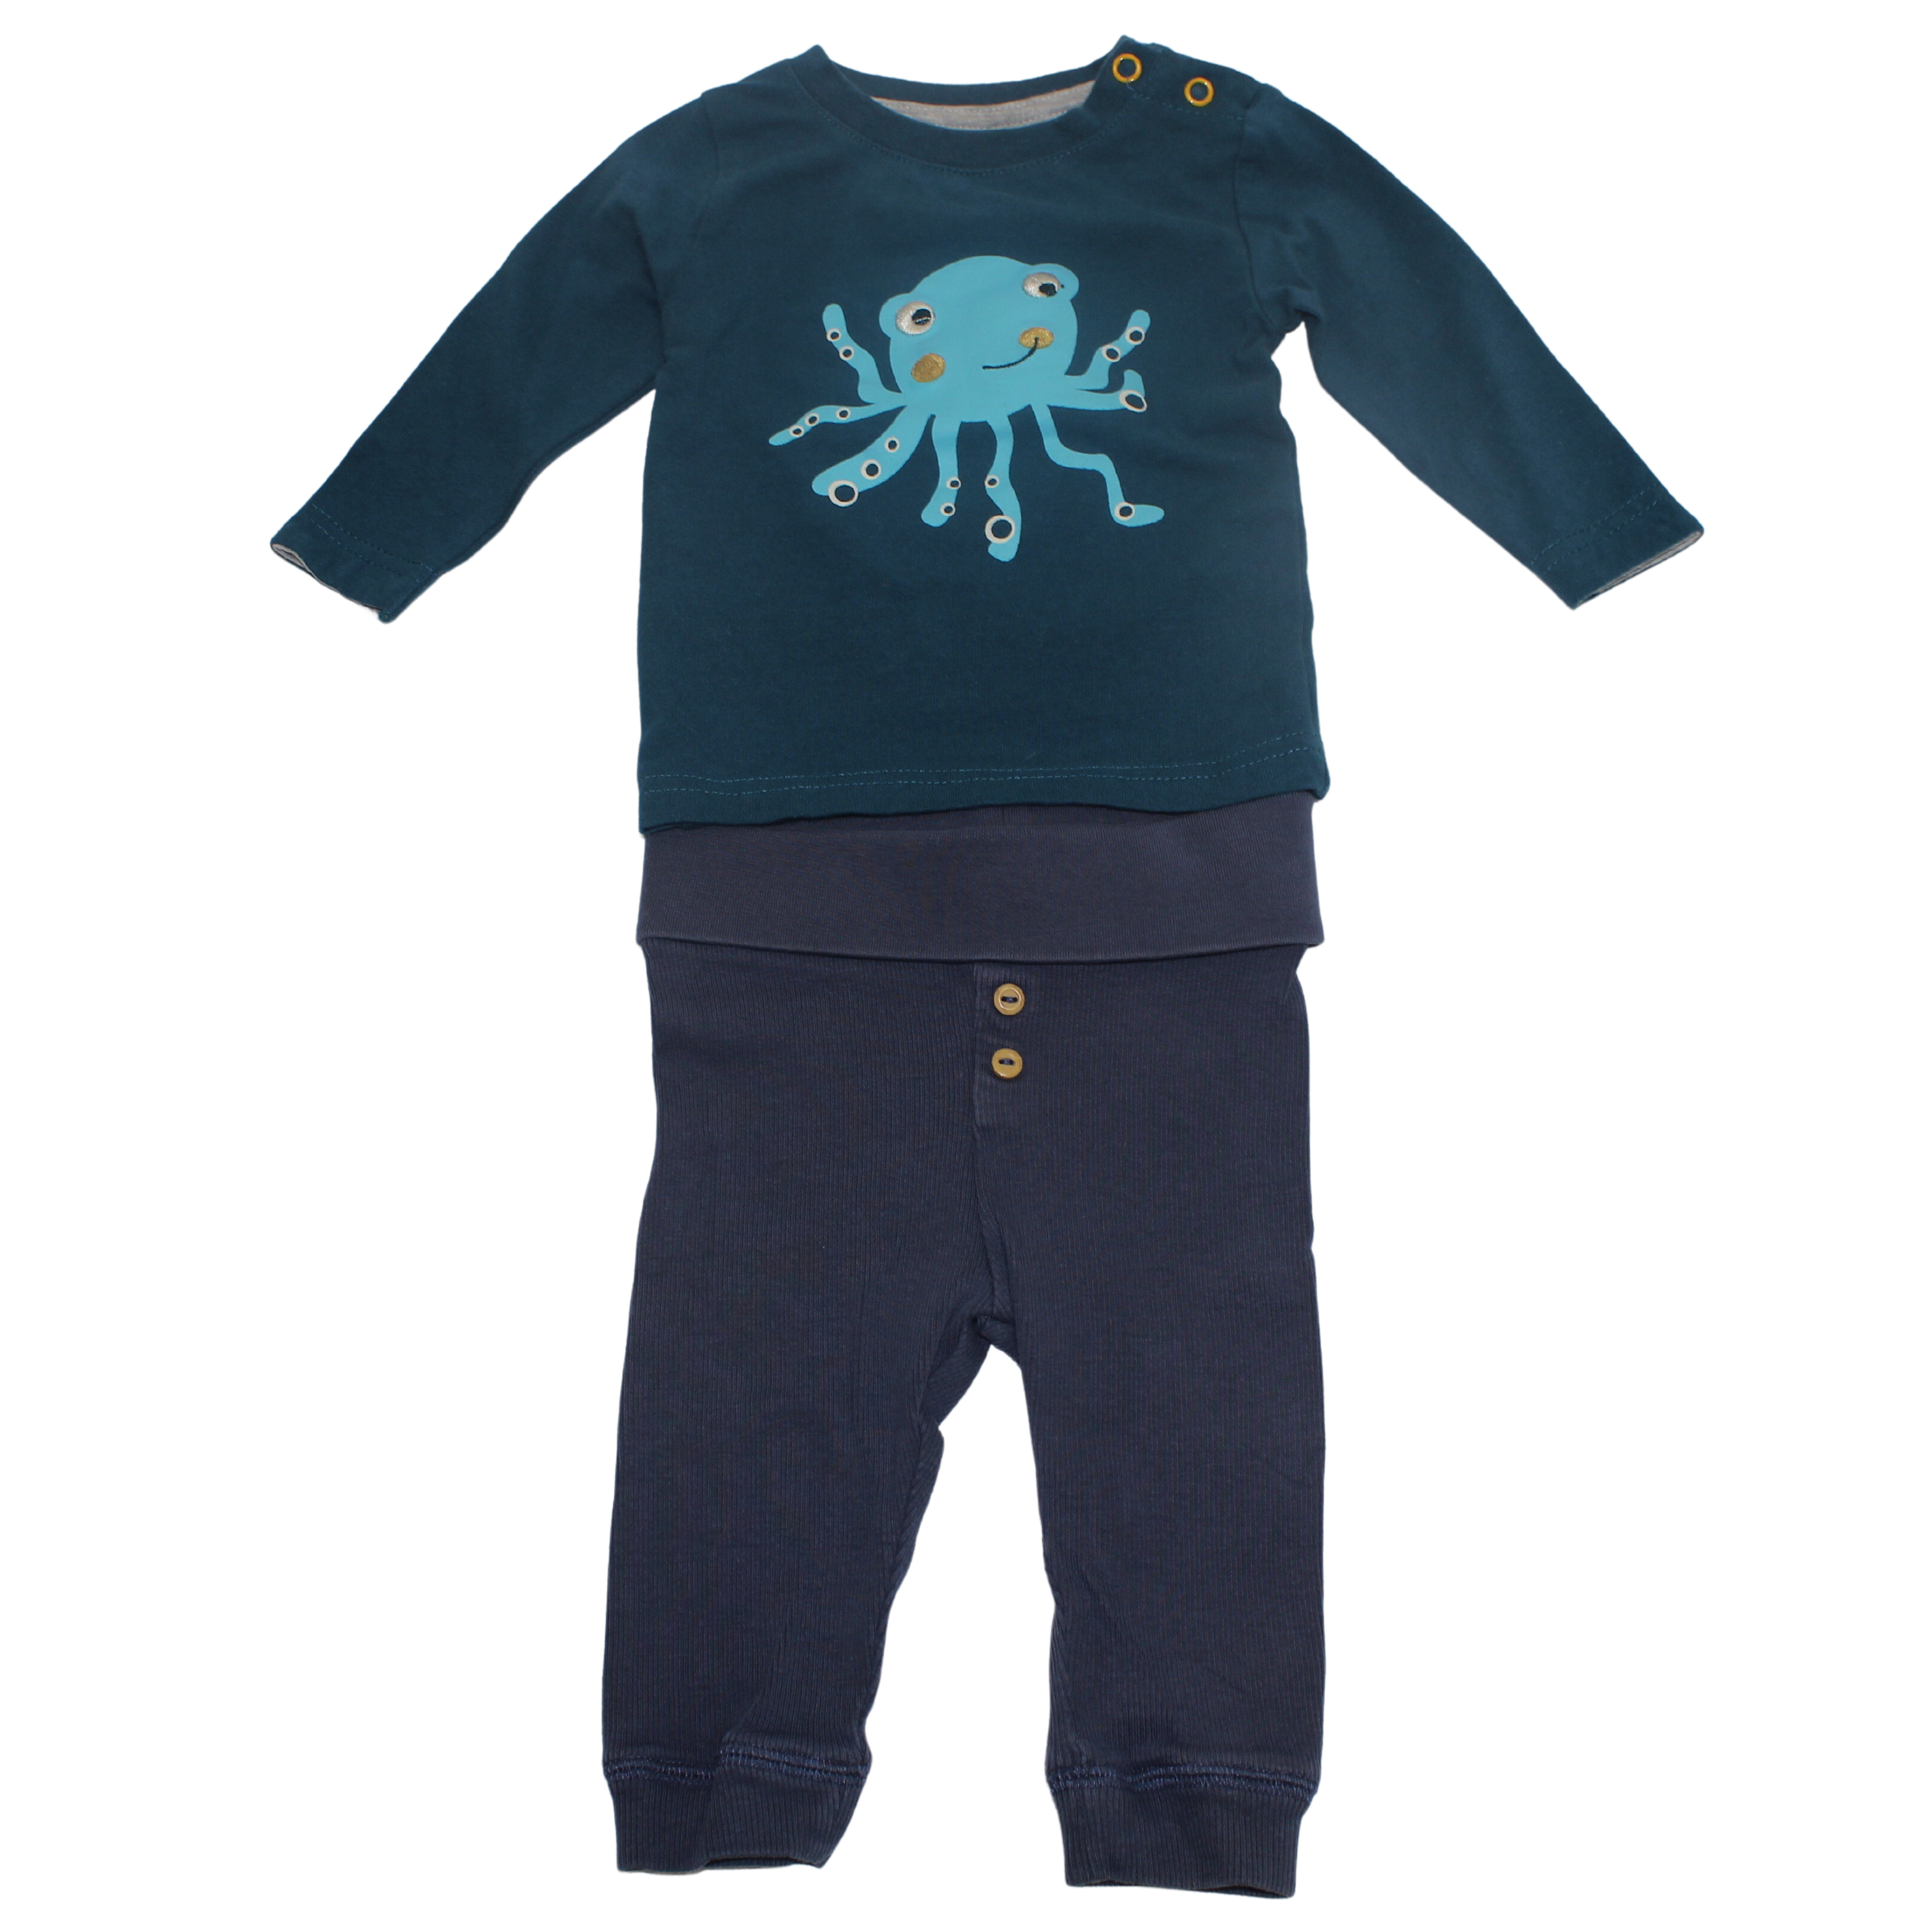 Octopus Outfit